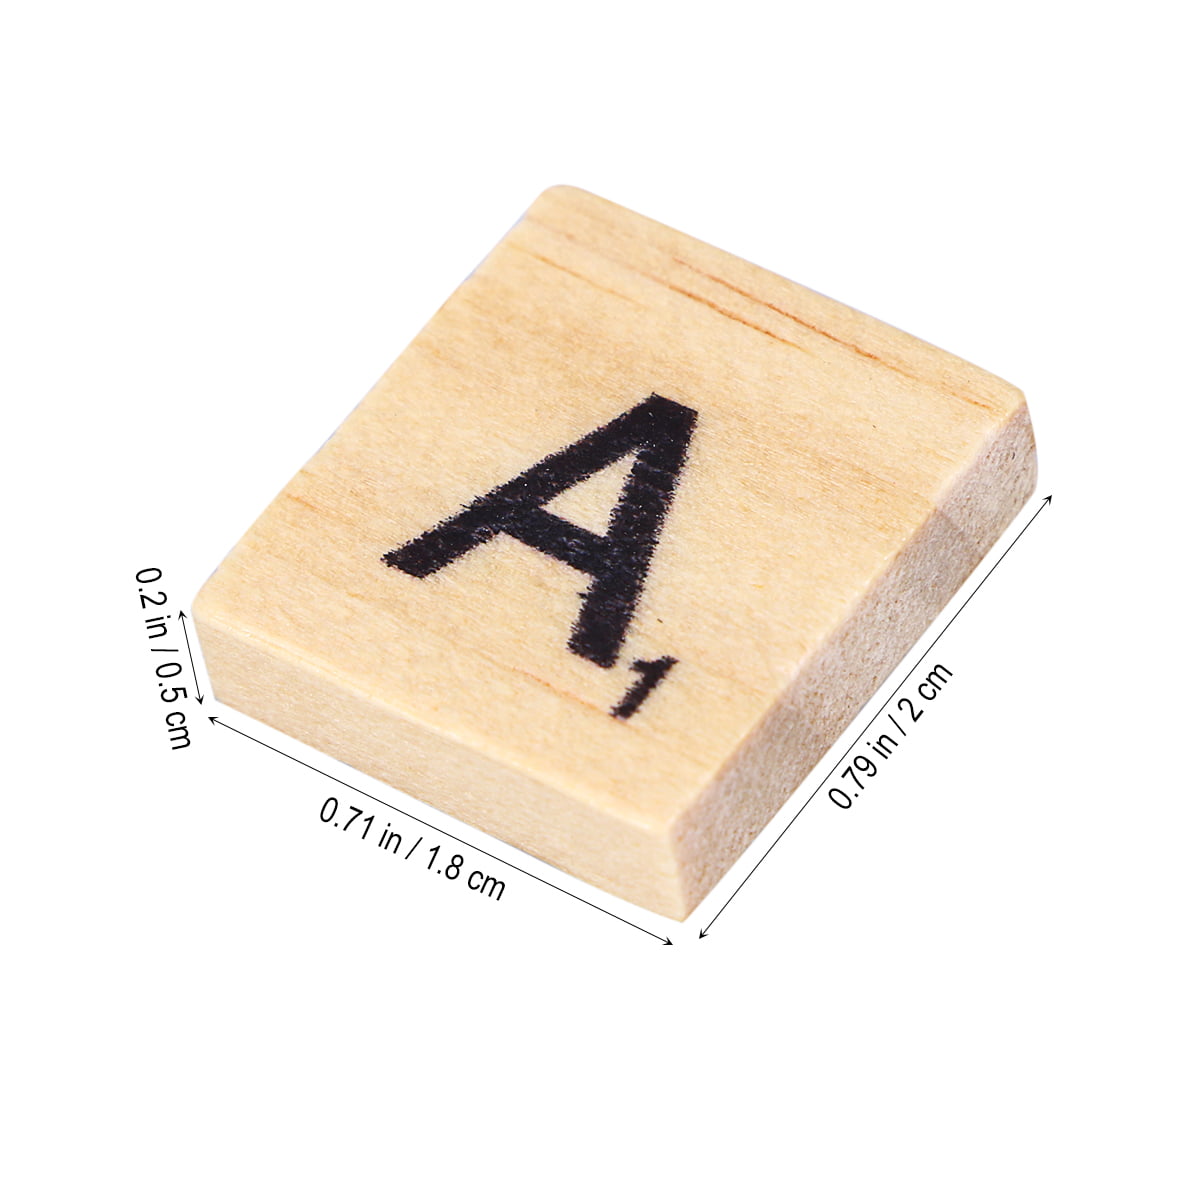 1 SCRABBLE GAME BOARD ONLY For Replacement or Great For DIY Projects 